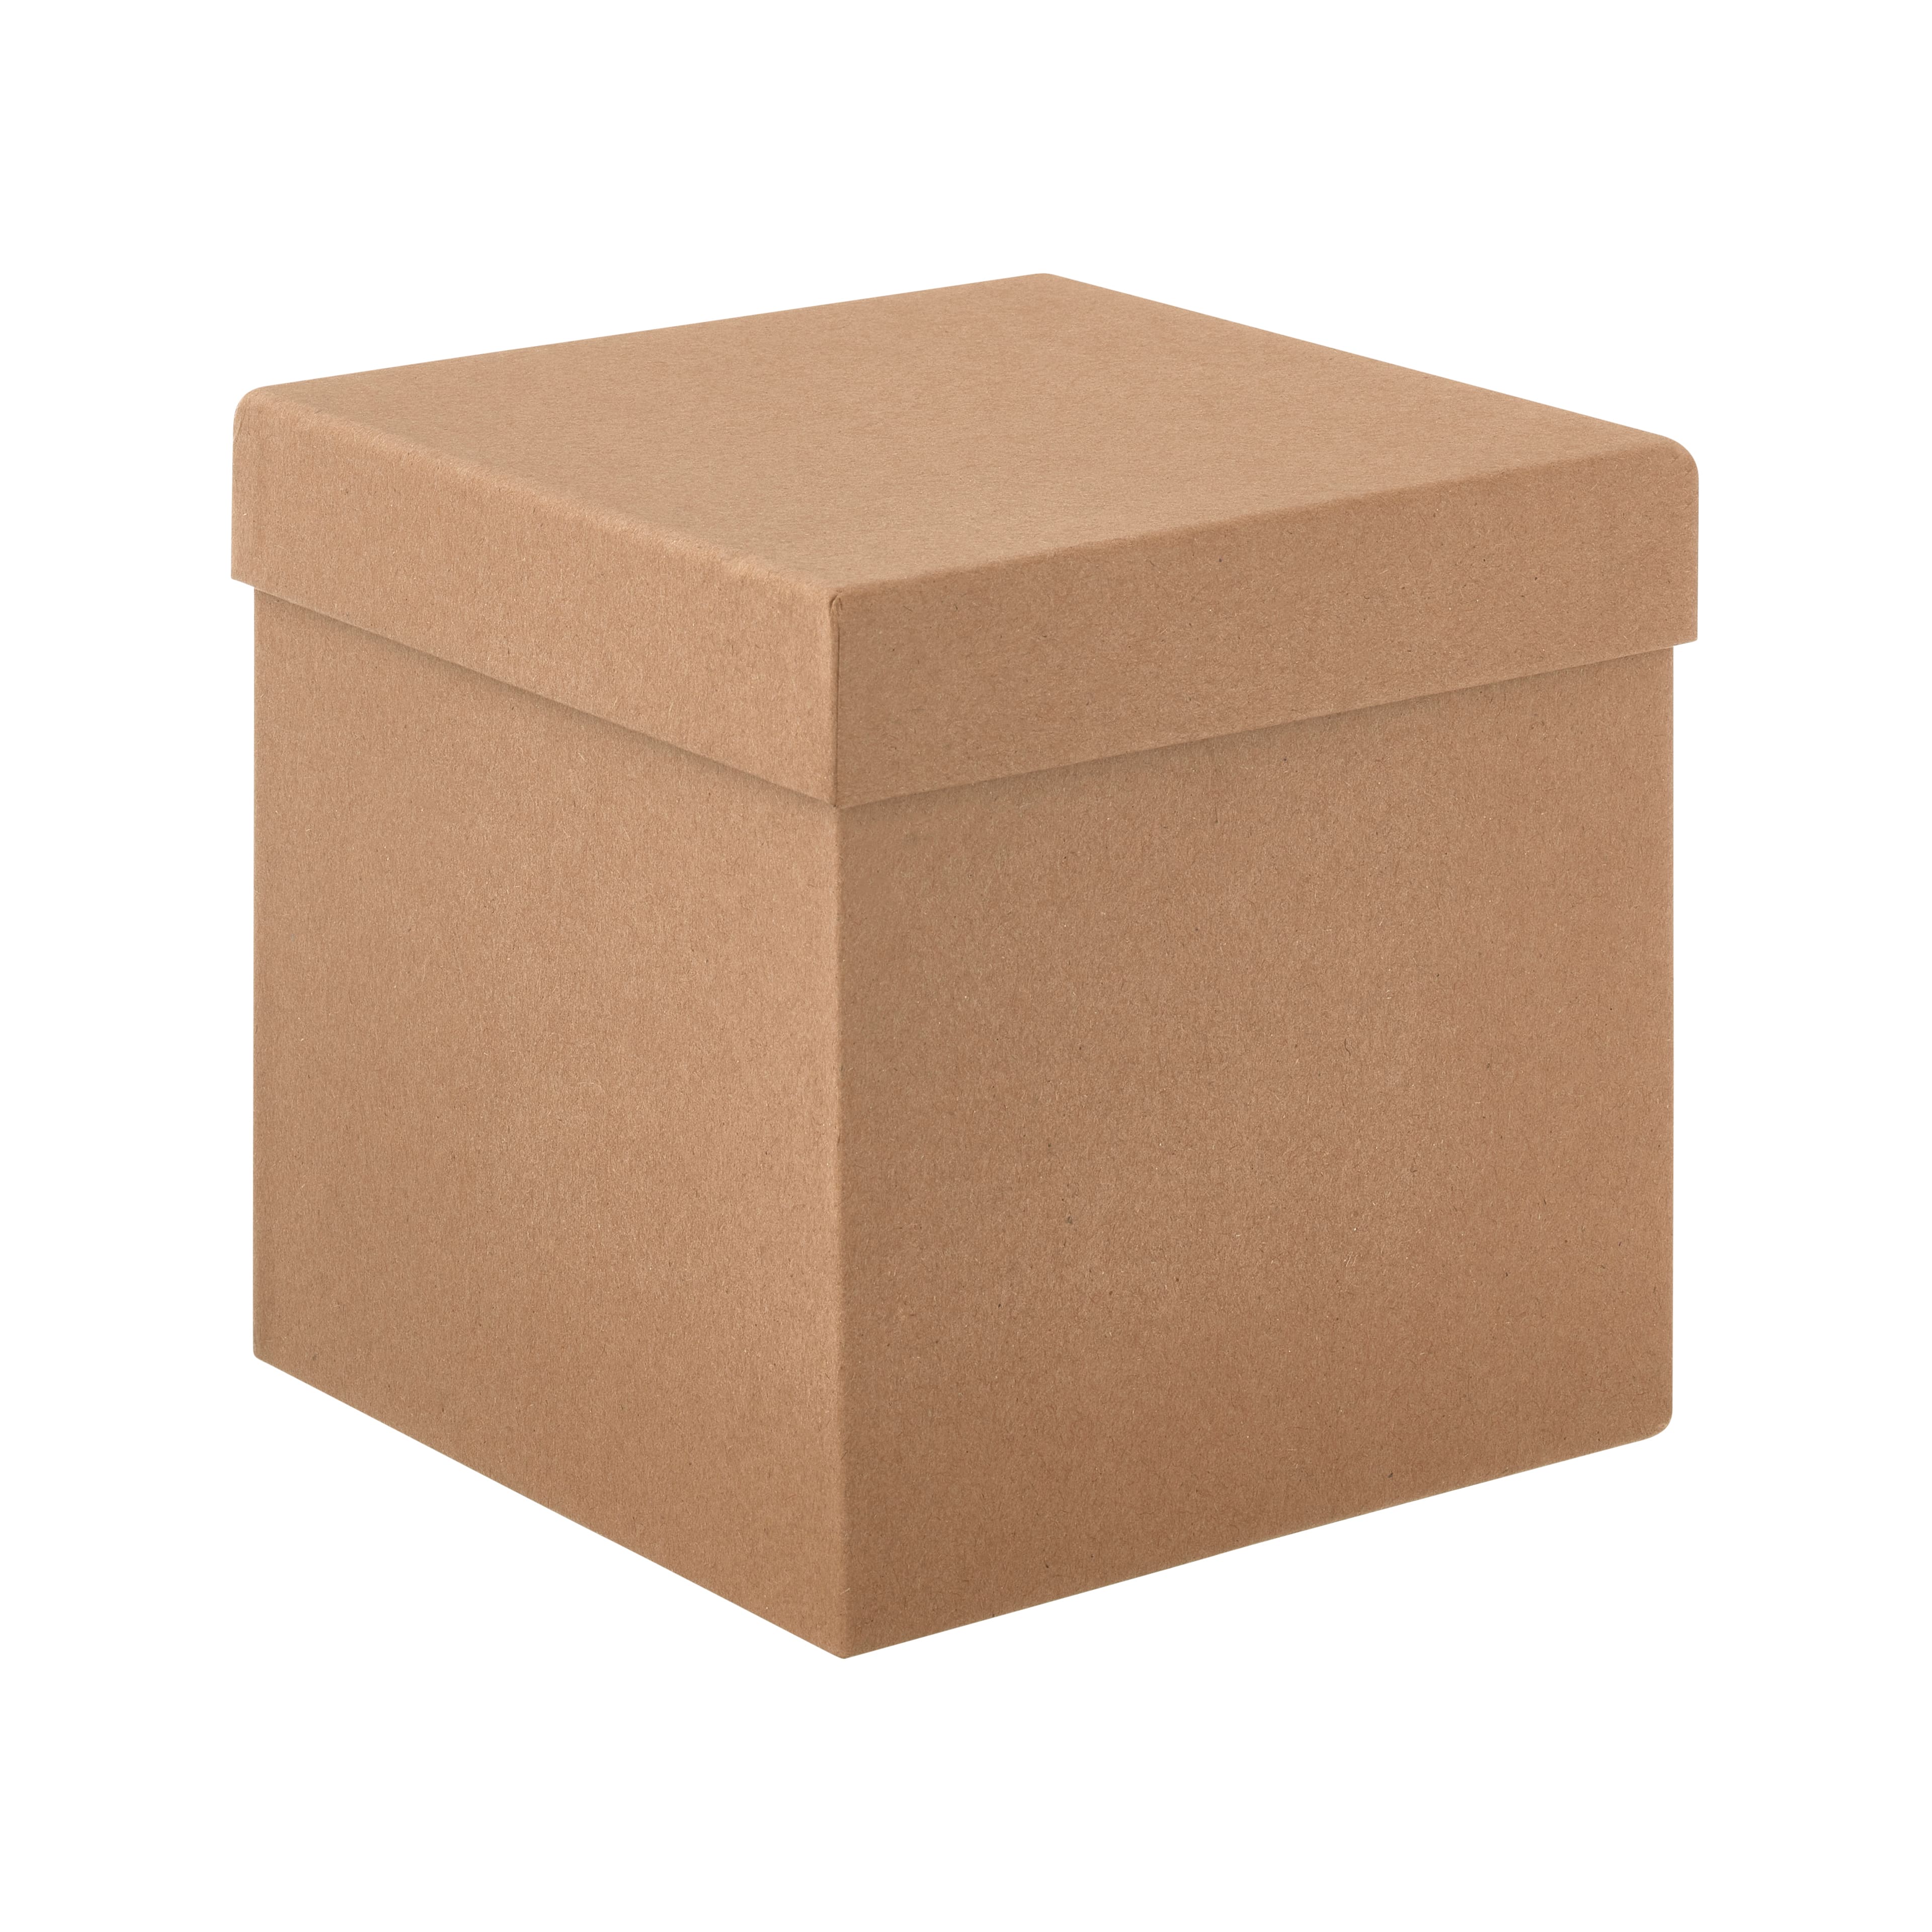 6 Pack, Brown Kraft Jewelry Gift Boxes, 4x4x1 inch, Fiber Fill for Party, Holiday & Events, Made in USA